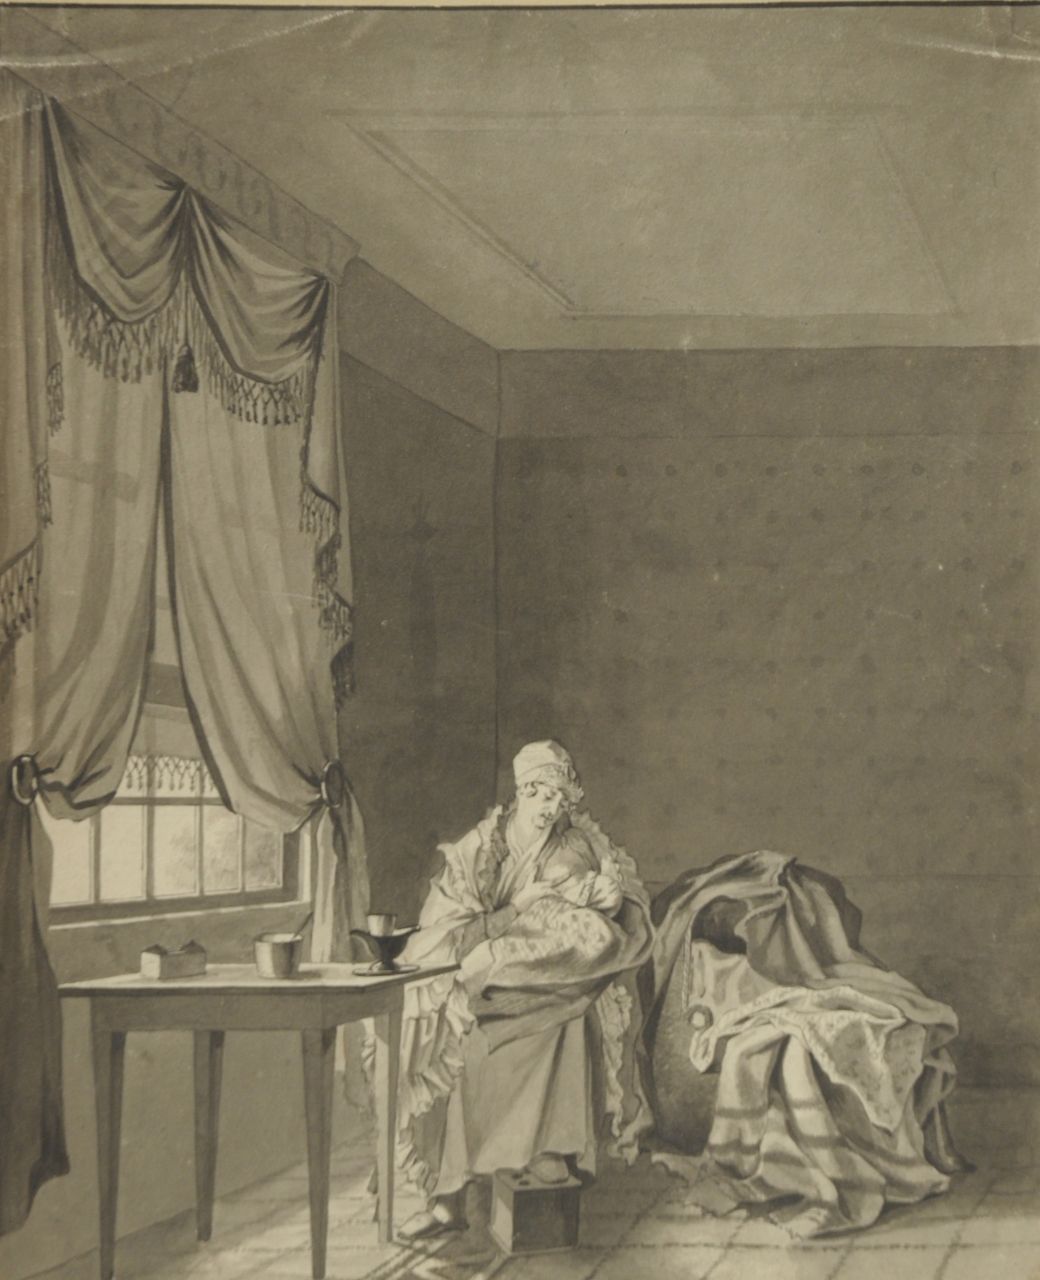 Krayestein A.  | Abraham Krayestein | Watercolours and drawings offered for sale | Interior with woman and child, pen, brush and ink on paper 34.4 x 28.2 cm, signed u.c. on layout sheet and dated 1829